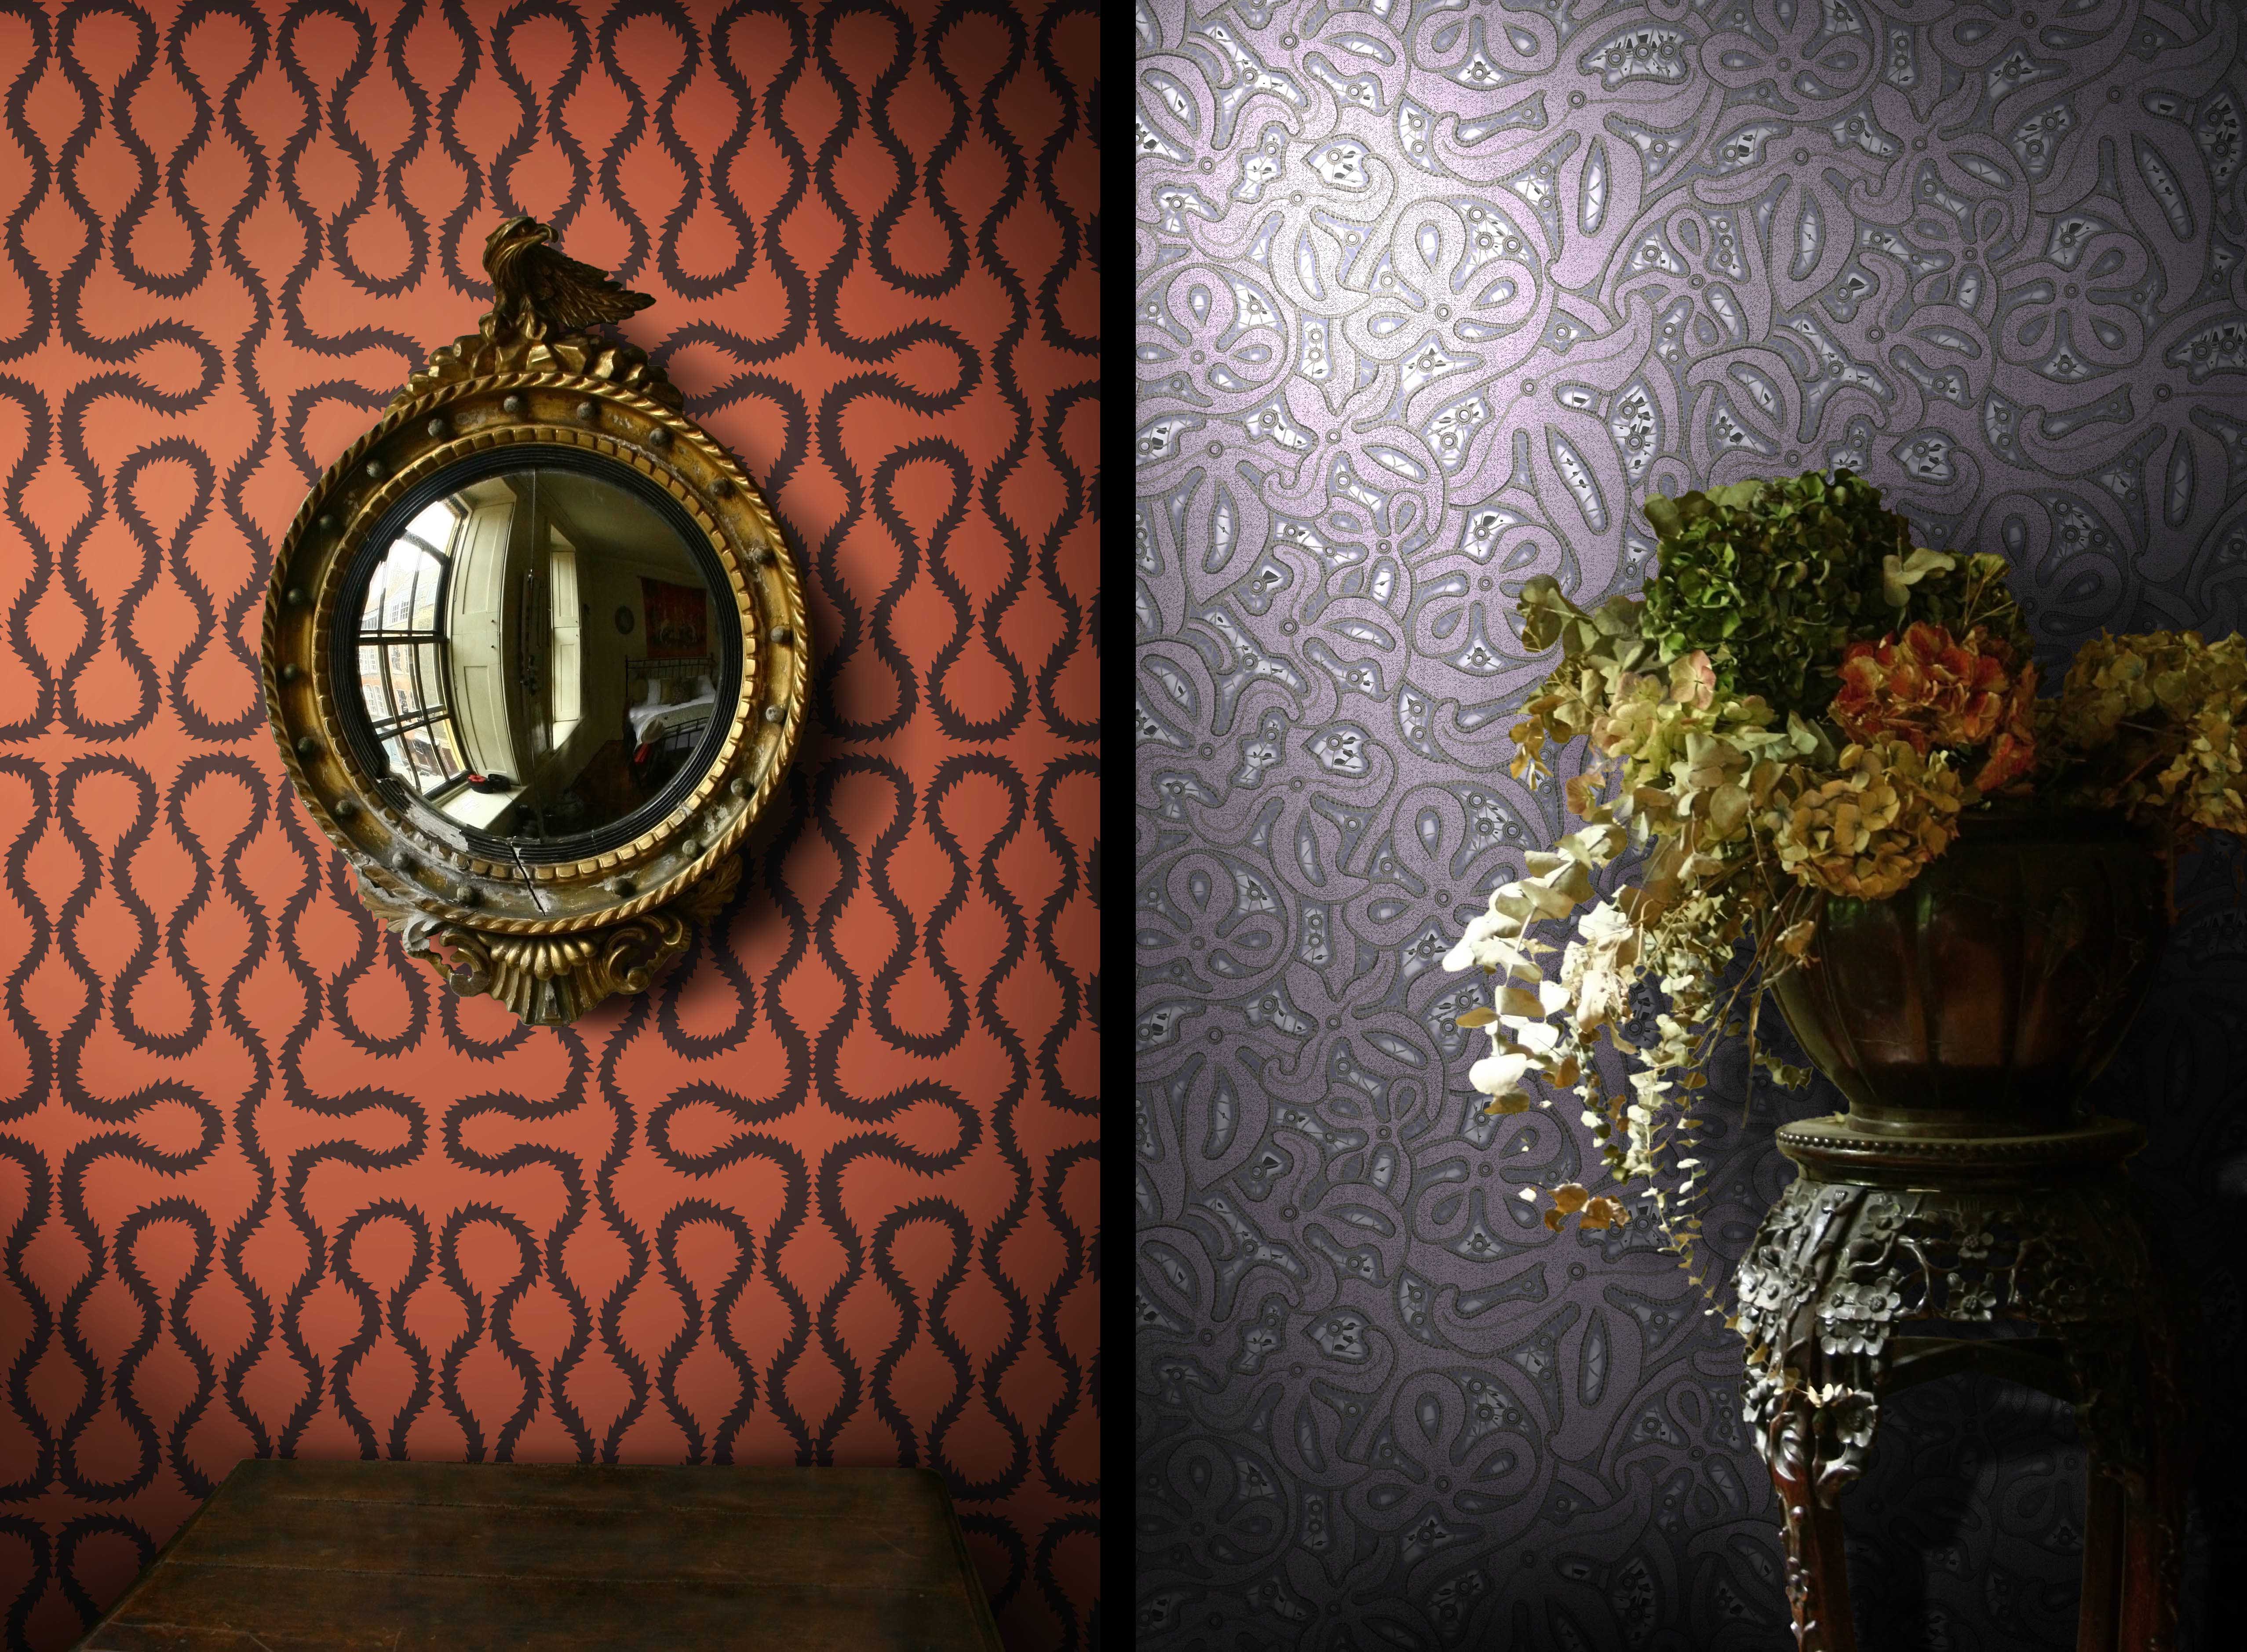 Pretty Wallpaper by Vivienne Westwood inspires fabric or lace wall